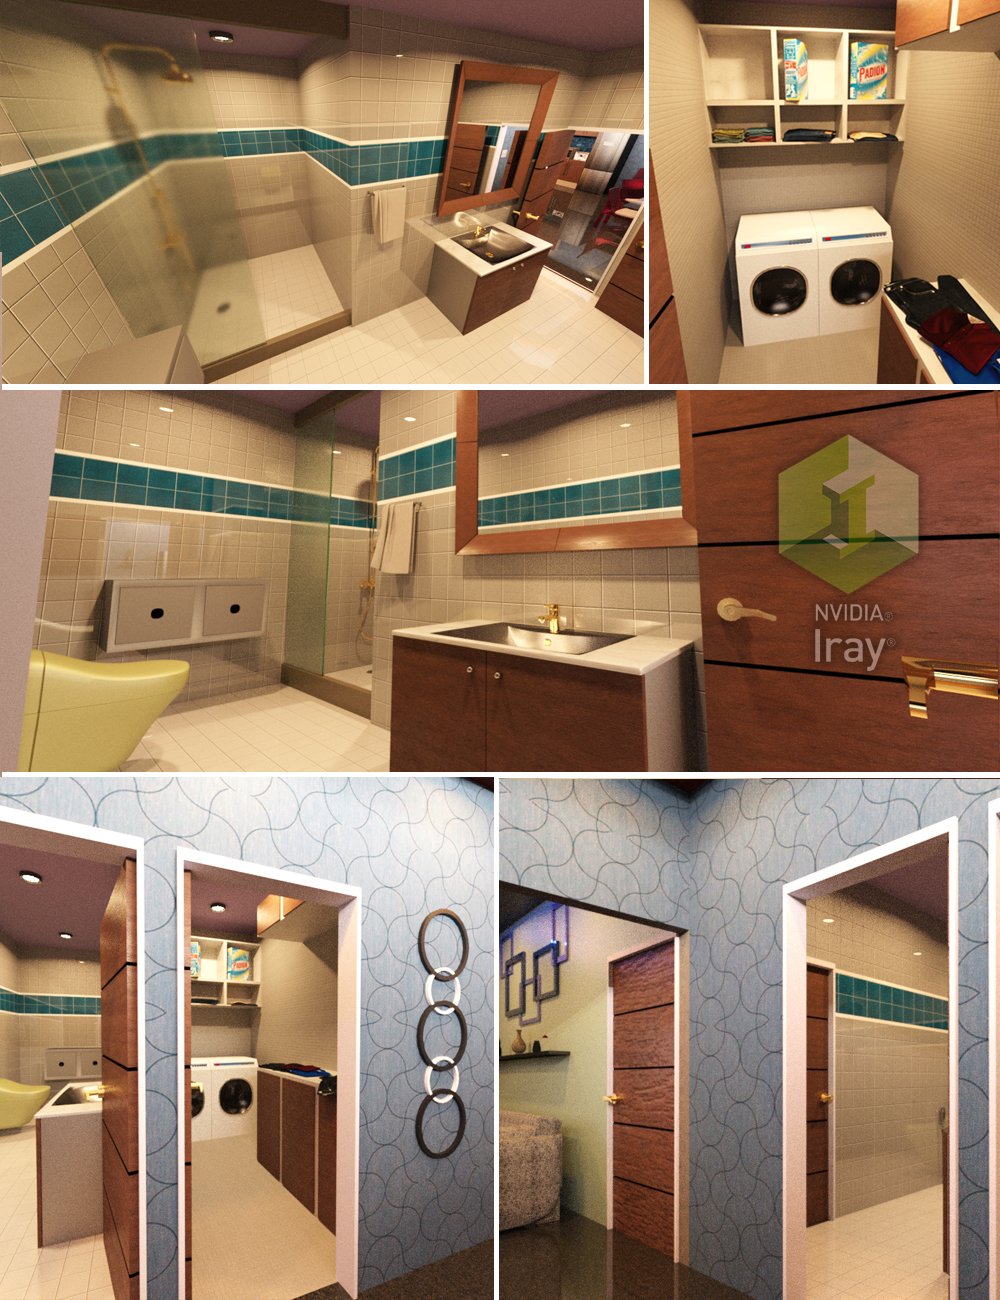 Bathroom and Laundry Area Set with Props by: Tesla3dCorp, 3D Models by Daz 3D